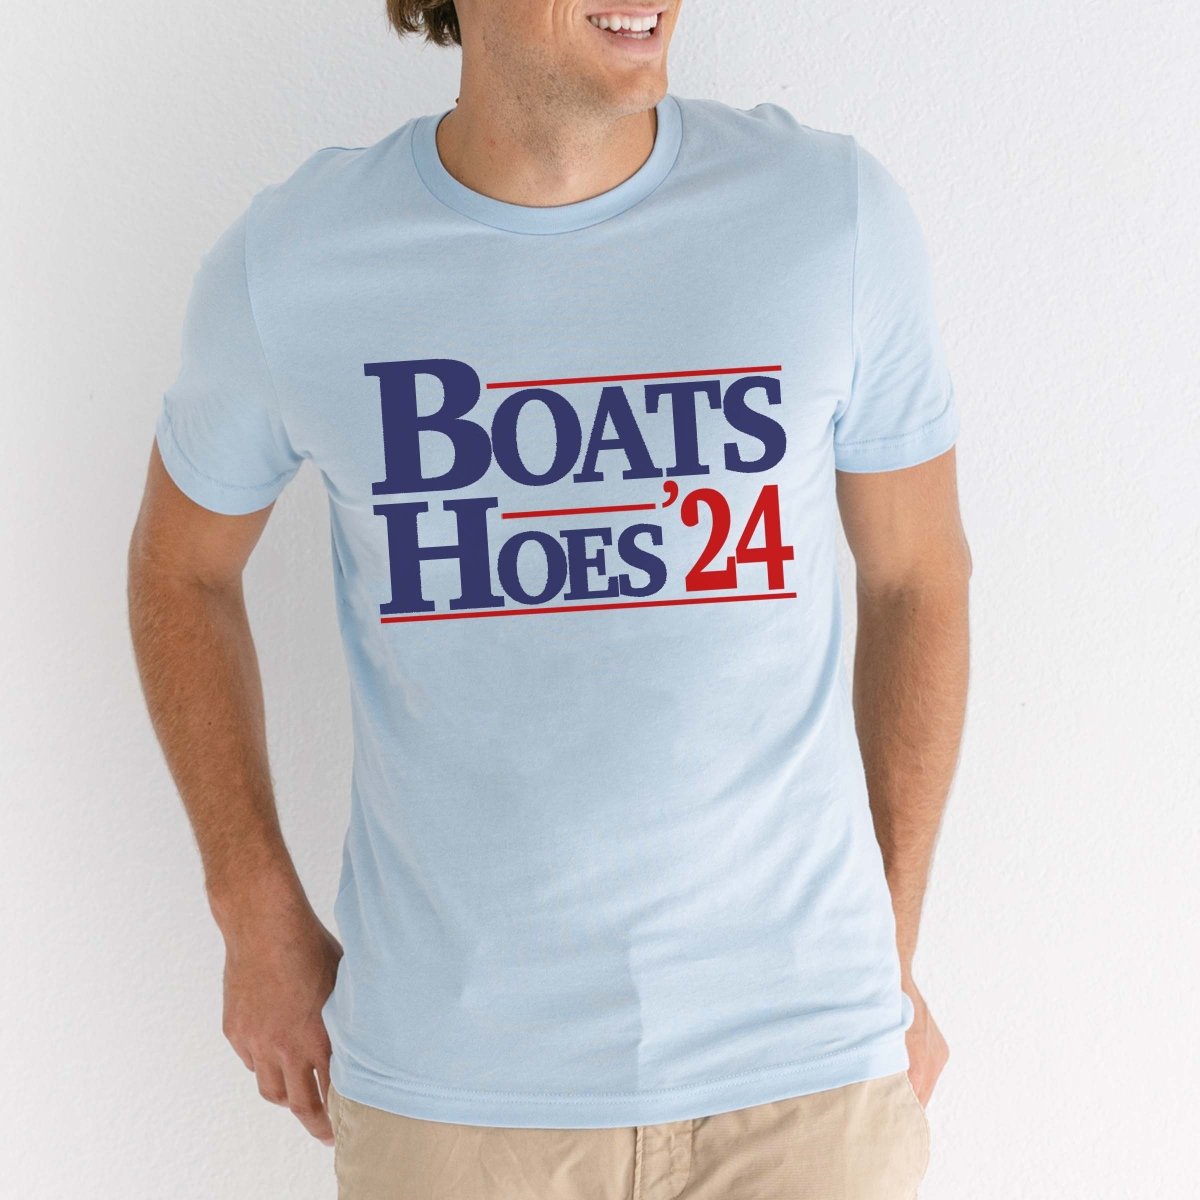 Boats Hoes 24 Tee - Limeberry Designs